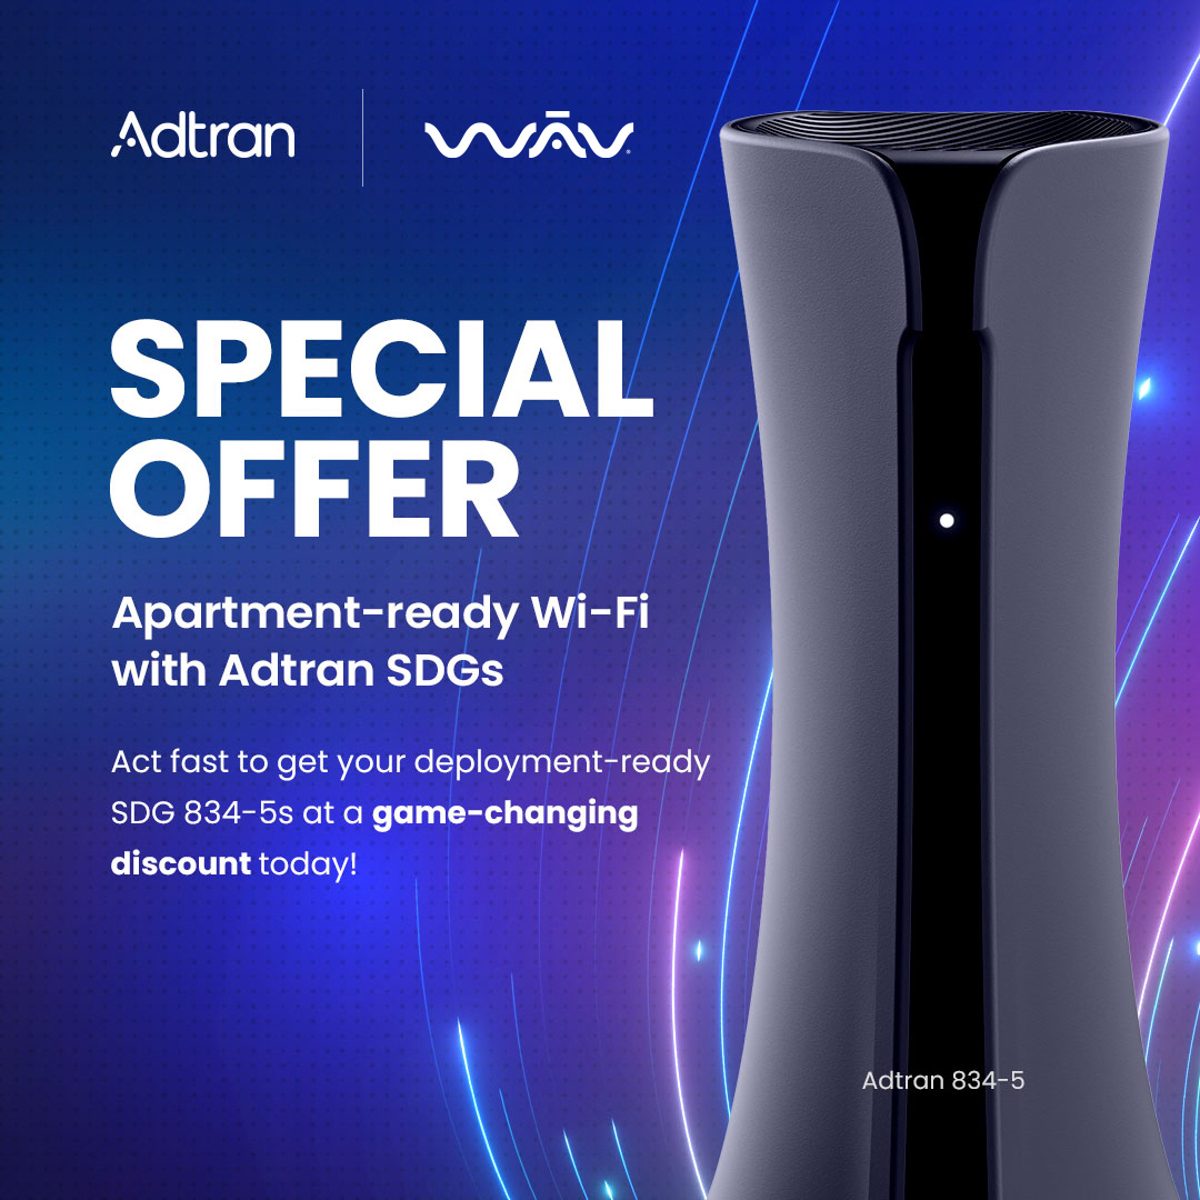 Special offer: Apartment Wi-Fi ready SDGs